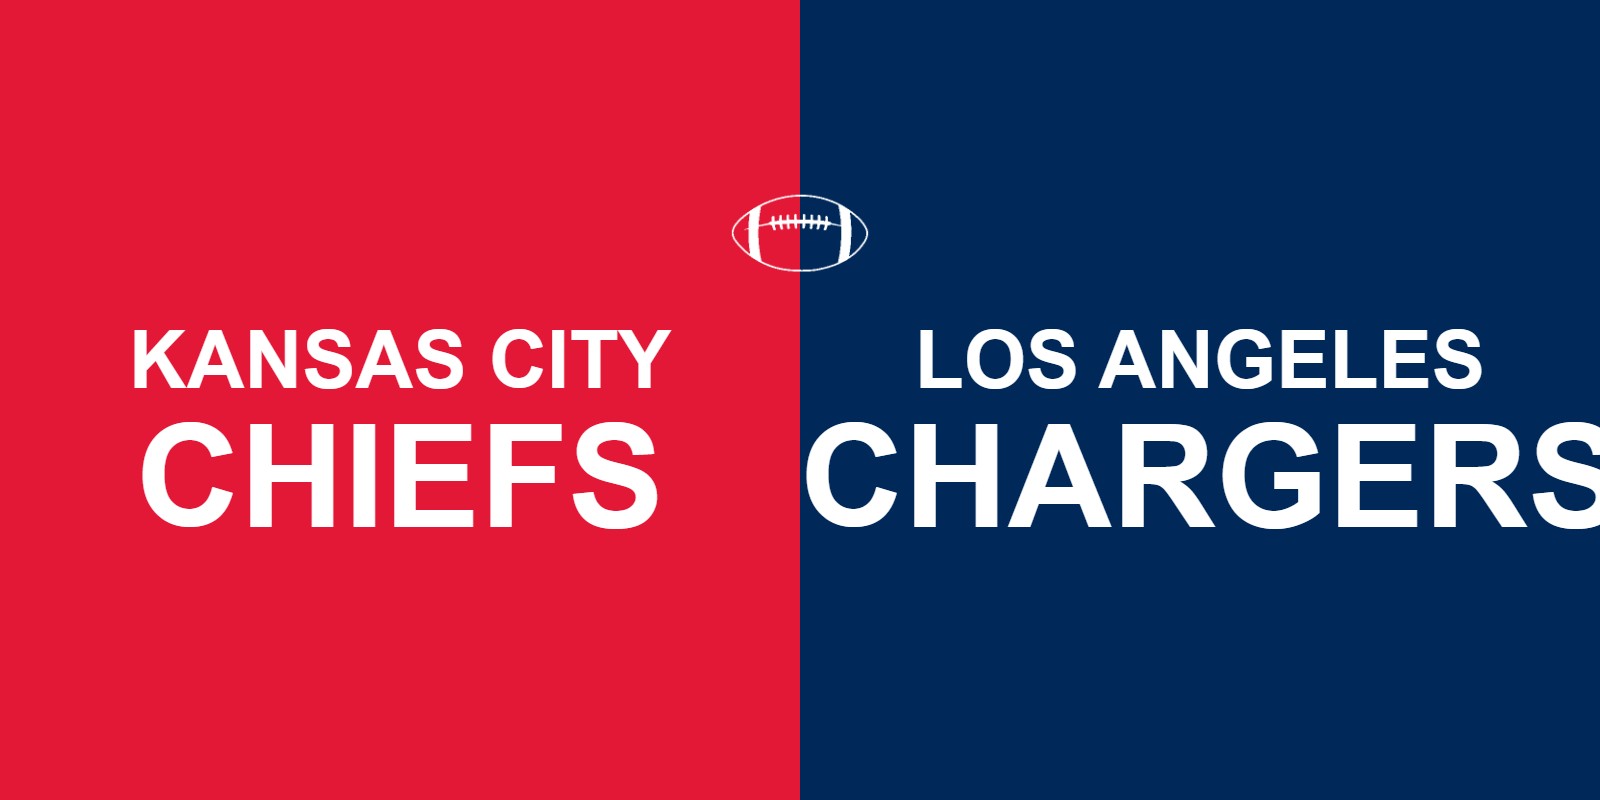 kansas city chiefs vs chargers tickets